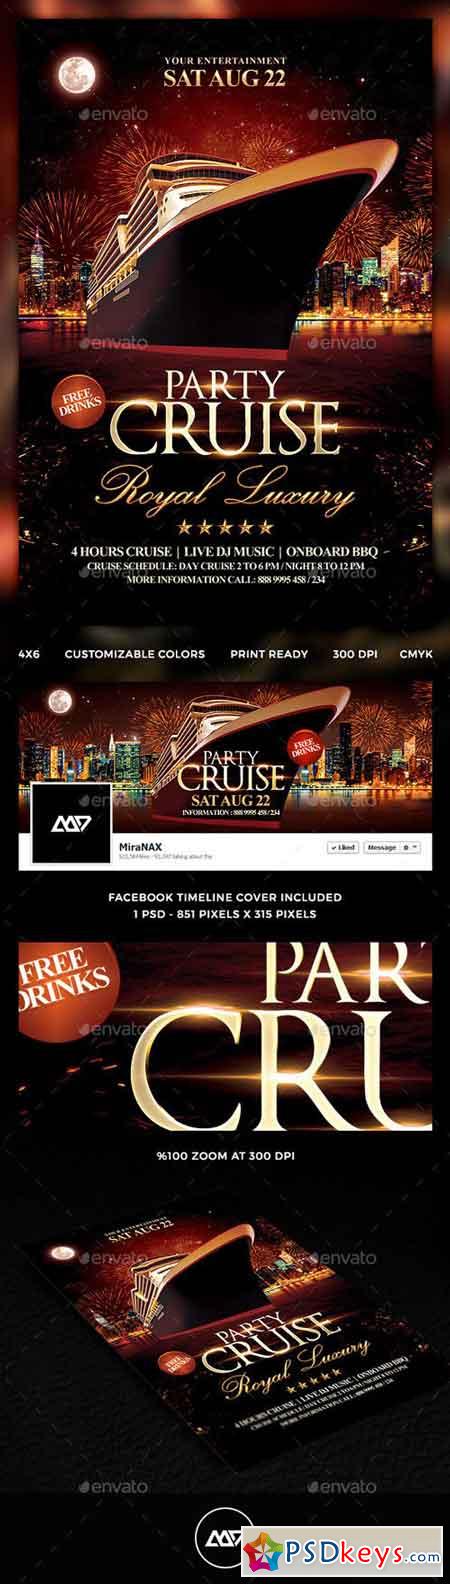 Cruise Party Flyer Template 12121840